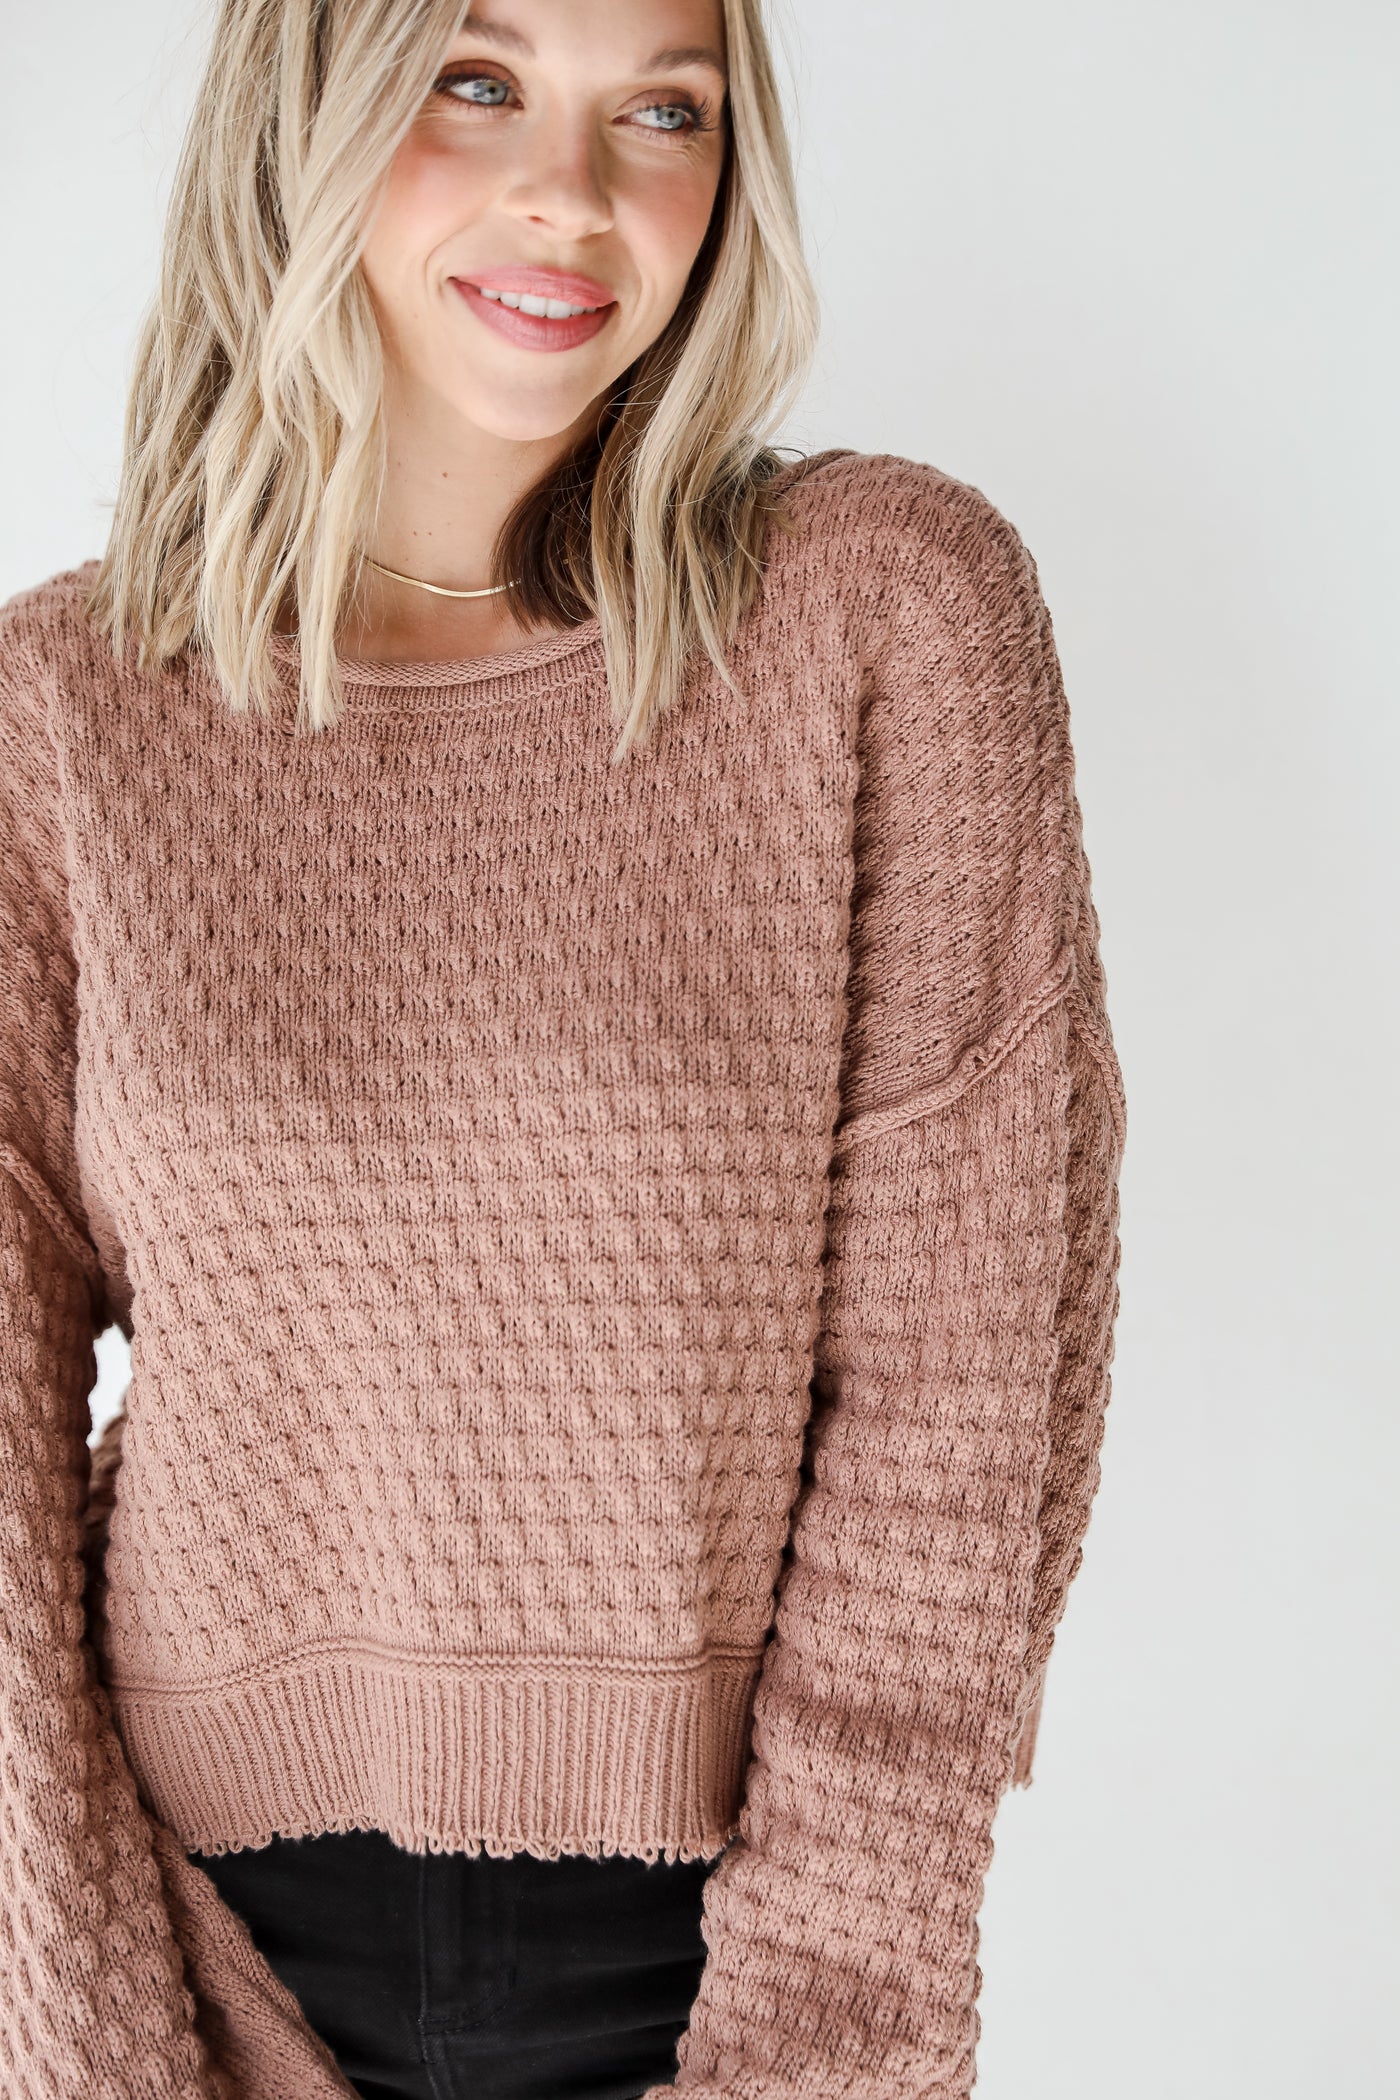 mauve sweater front view